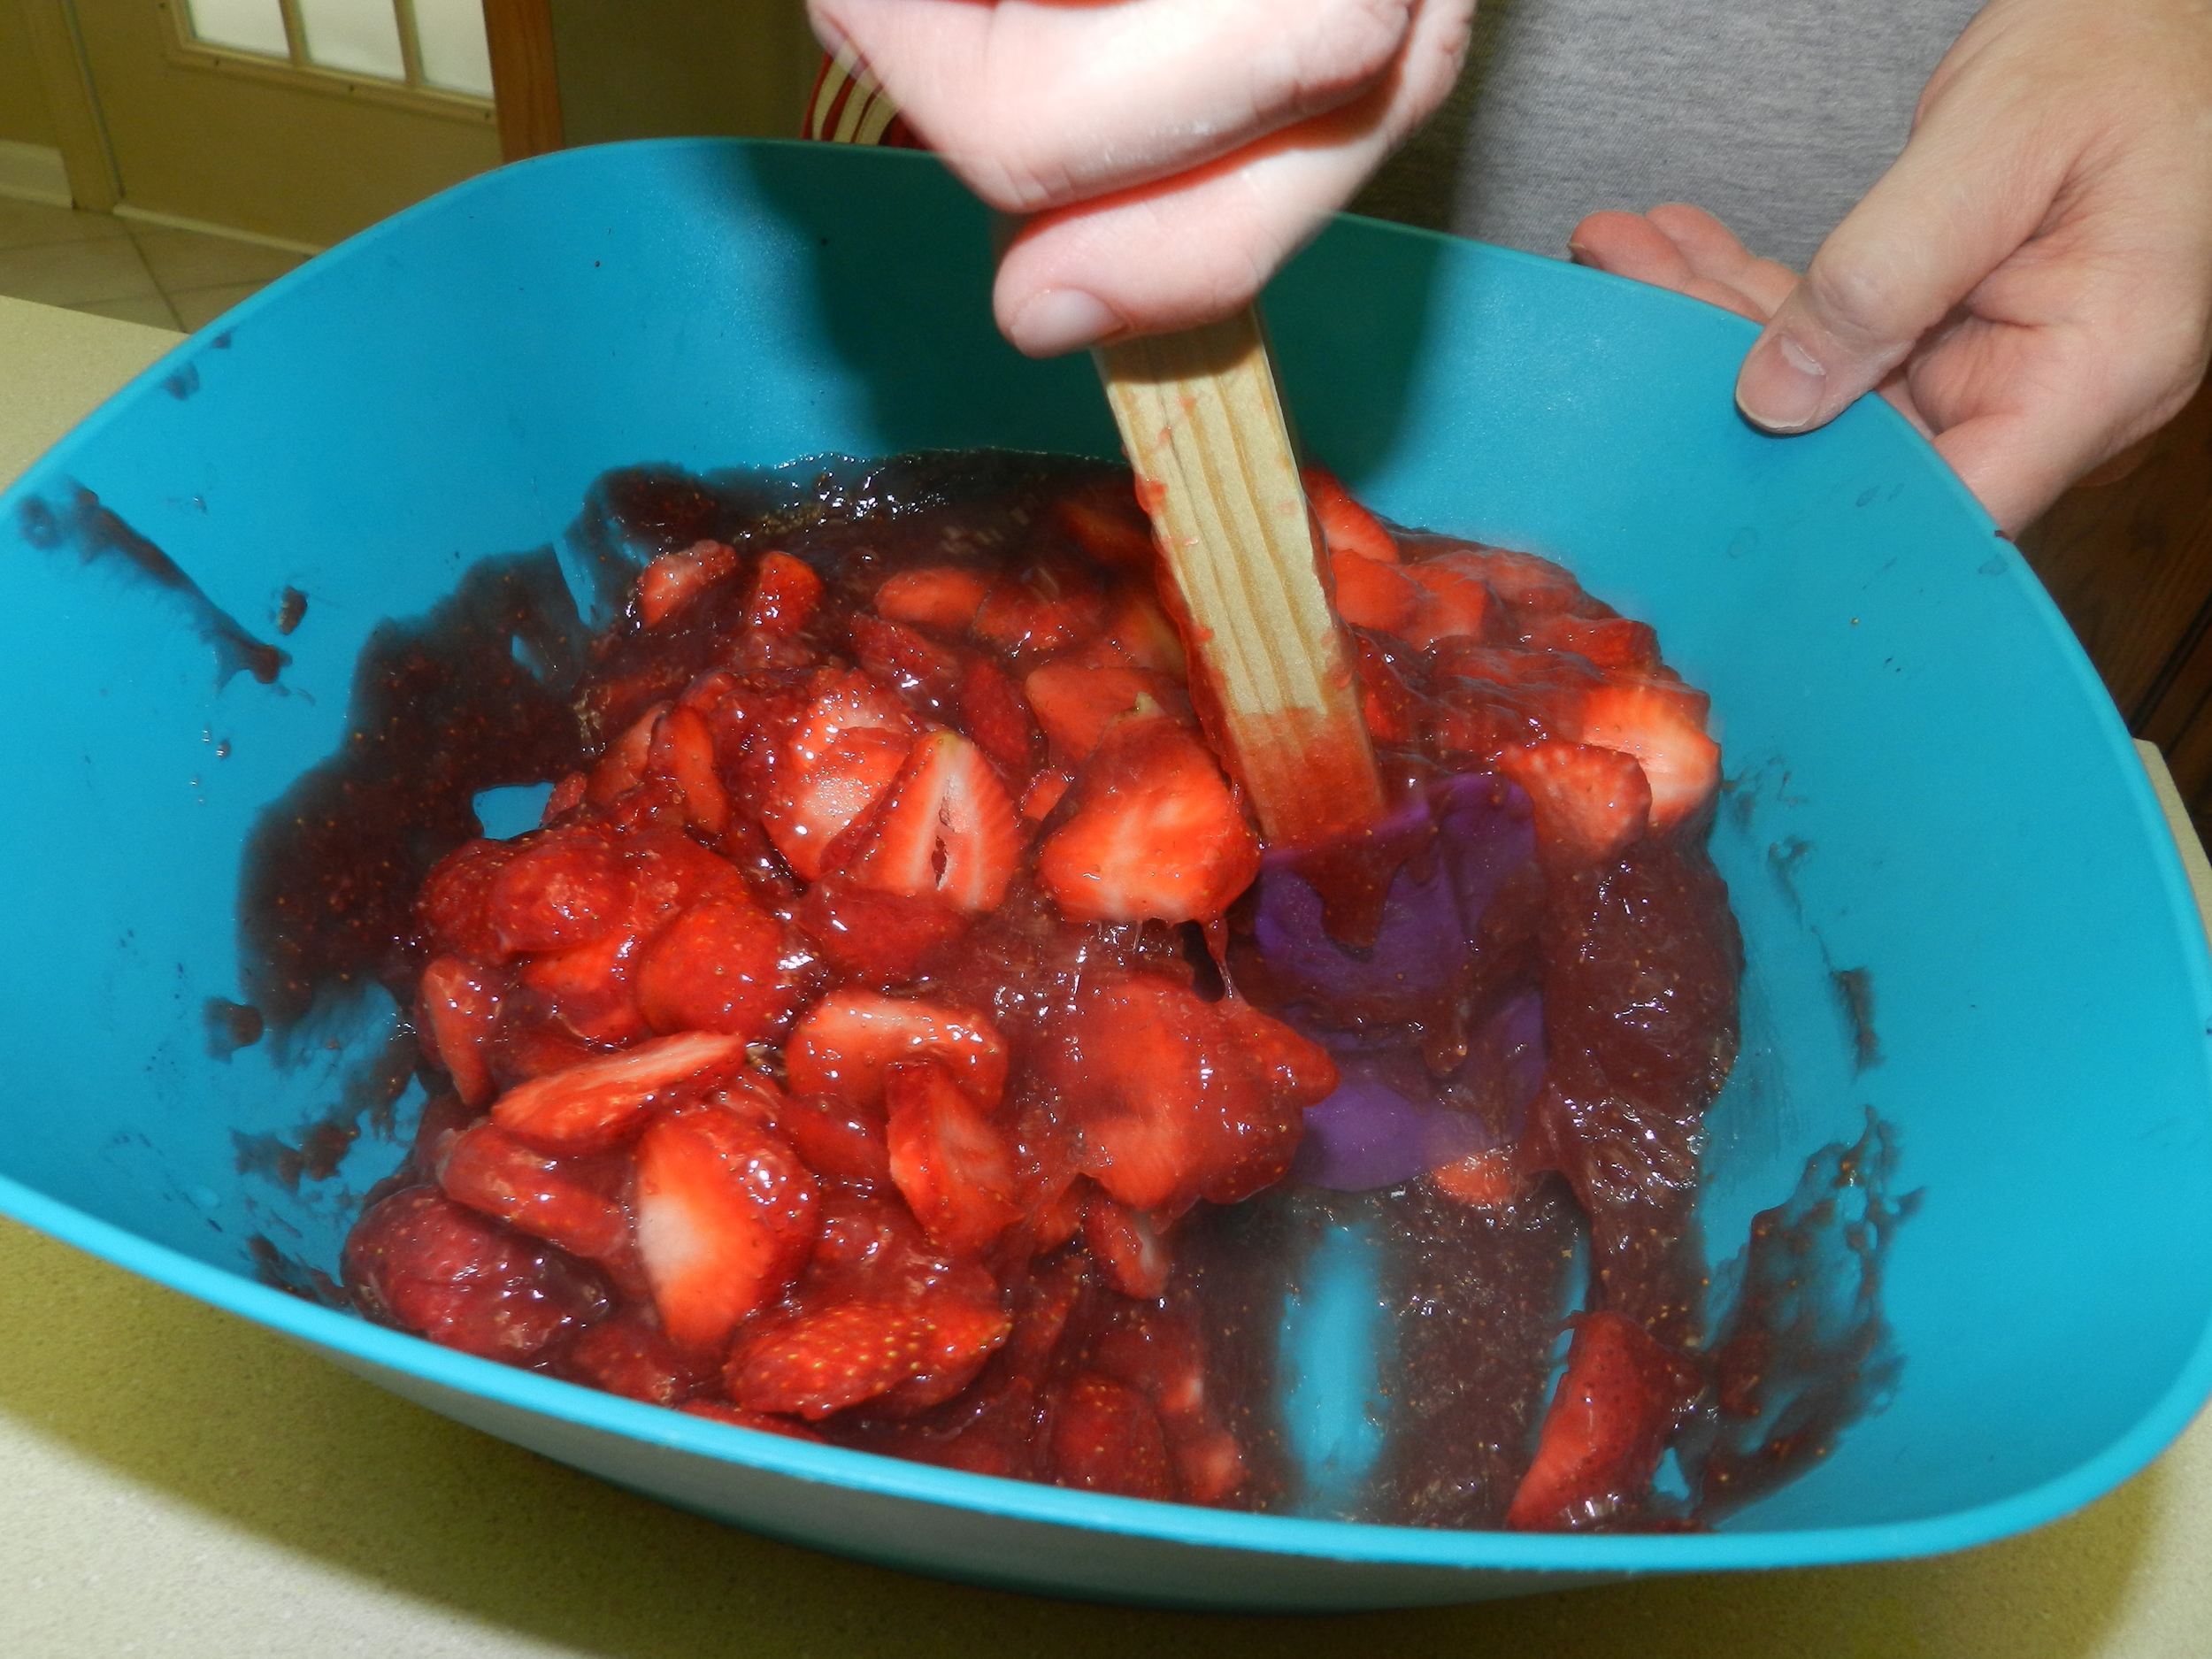 Mixing Sliced and Cooked Berries